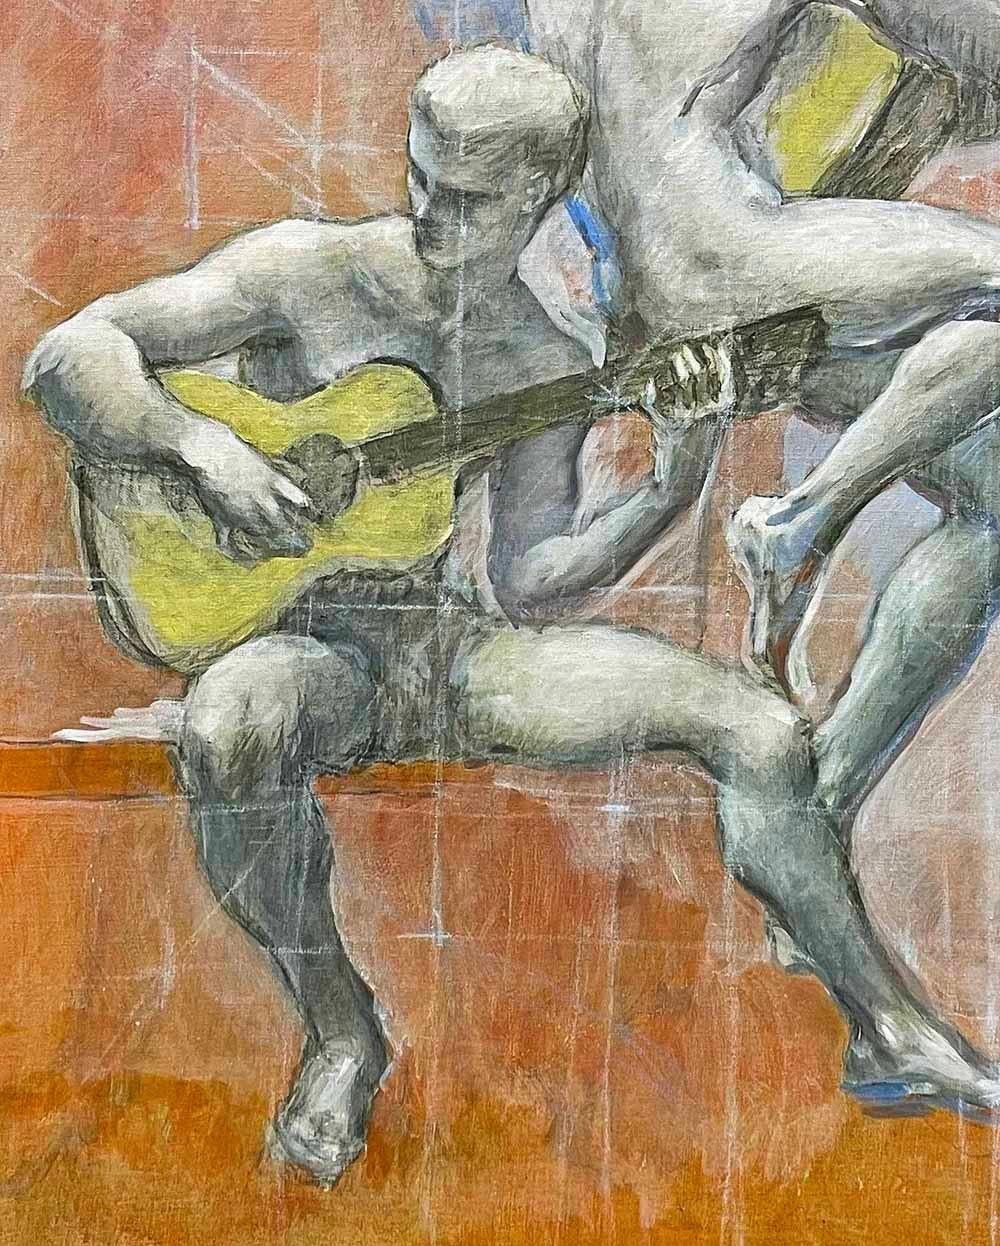 Beautifully painted in tones of ruddy-burnt sienna, gray and white, this unusual painting by Christopher Clark depicts two nude guitarists -- or perhaps a single guitarist in two positions.  The entire painting is gridded in white, perhaps